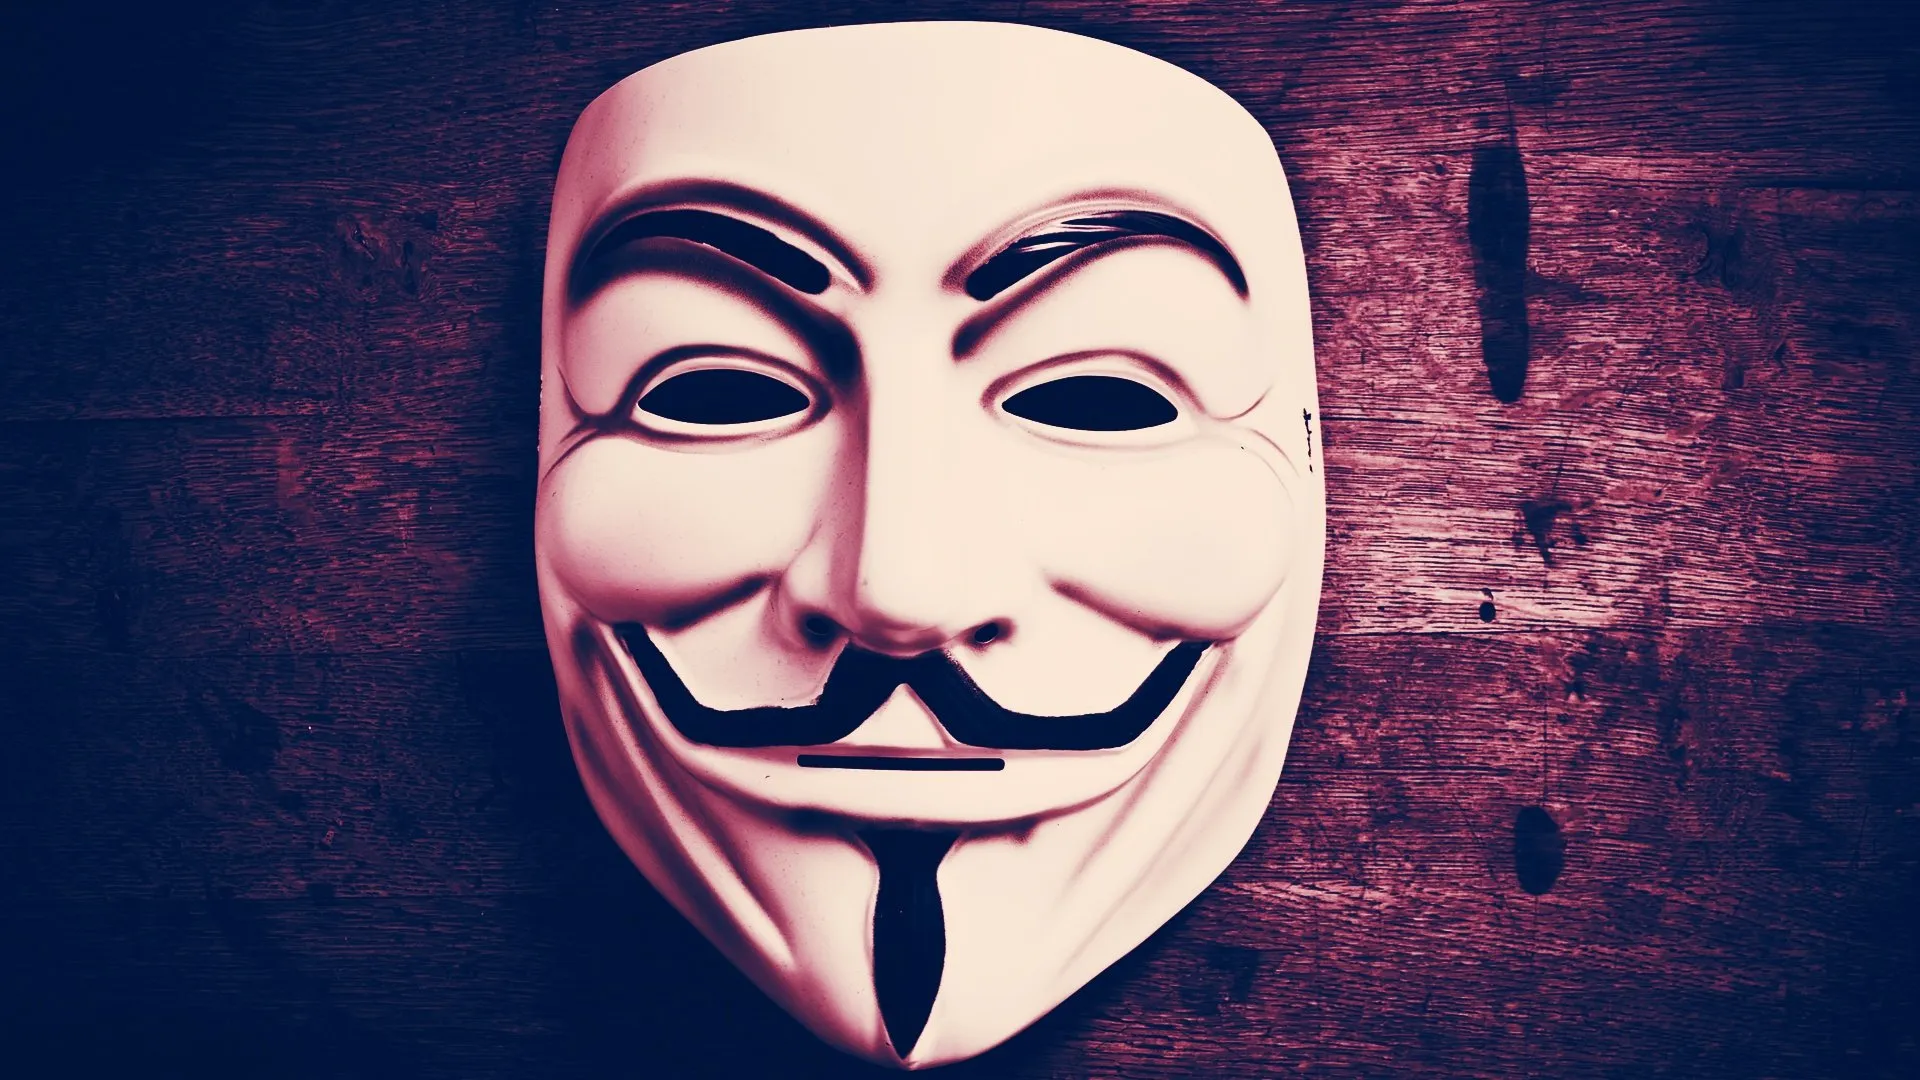 Anonymous returns, hacking the police after the killing of George Floyd. Image: Shutterstock